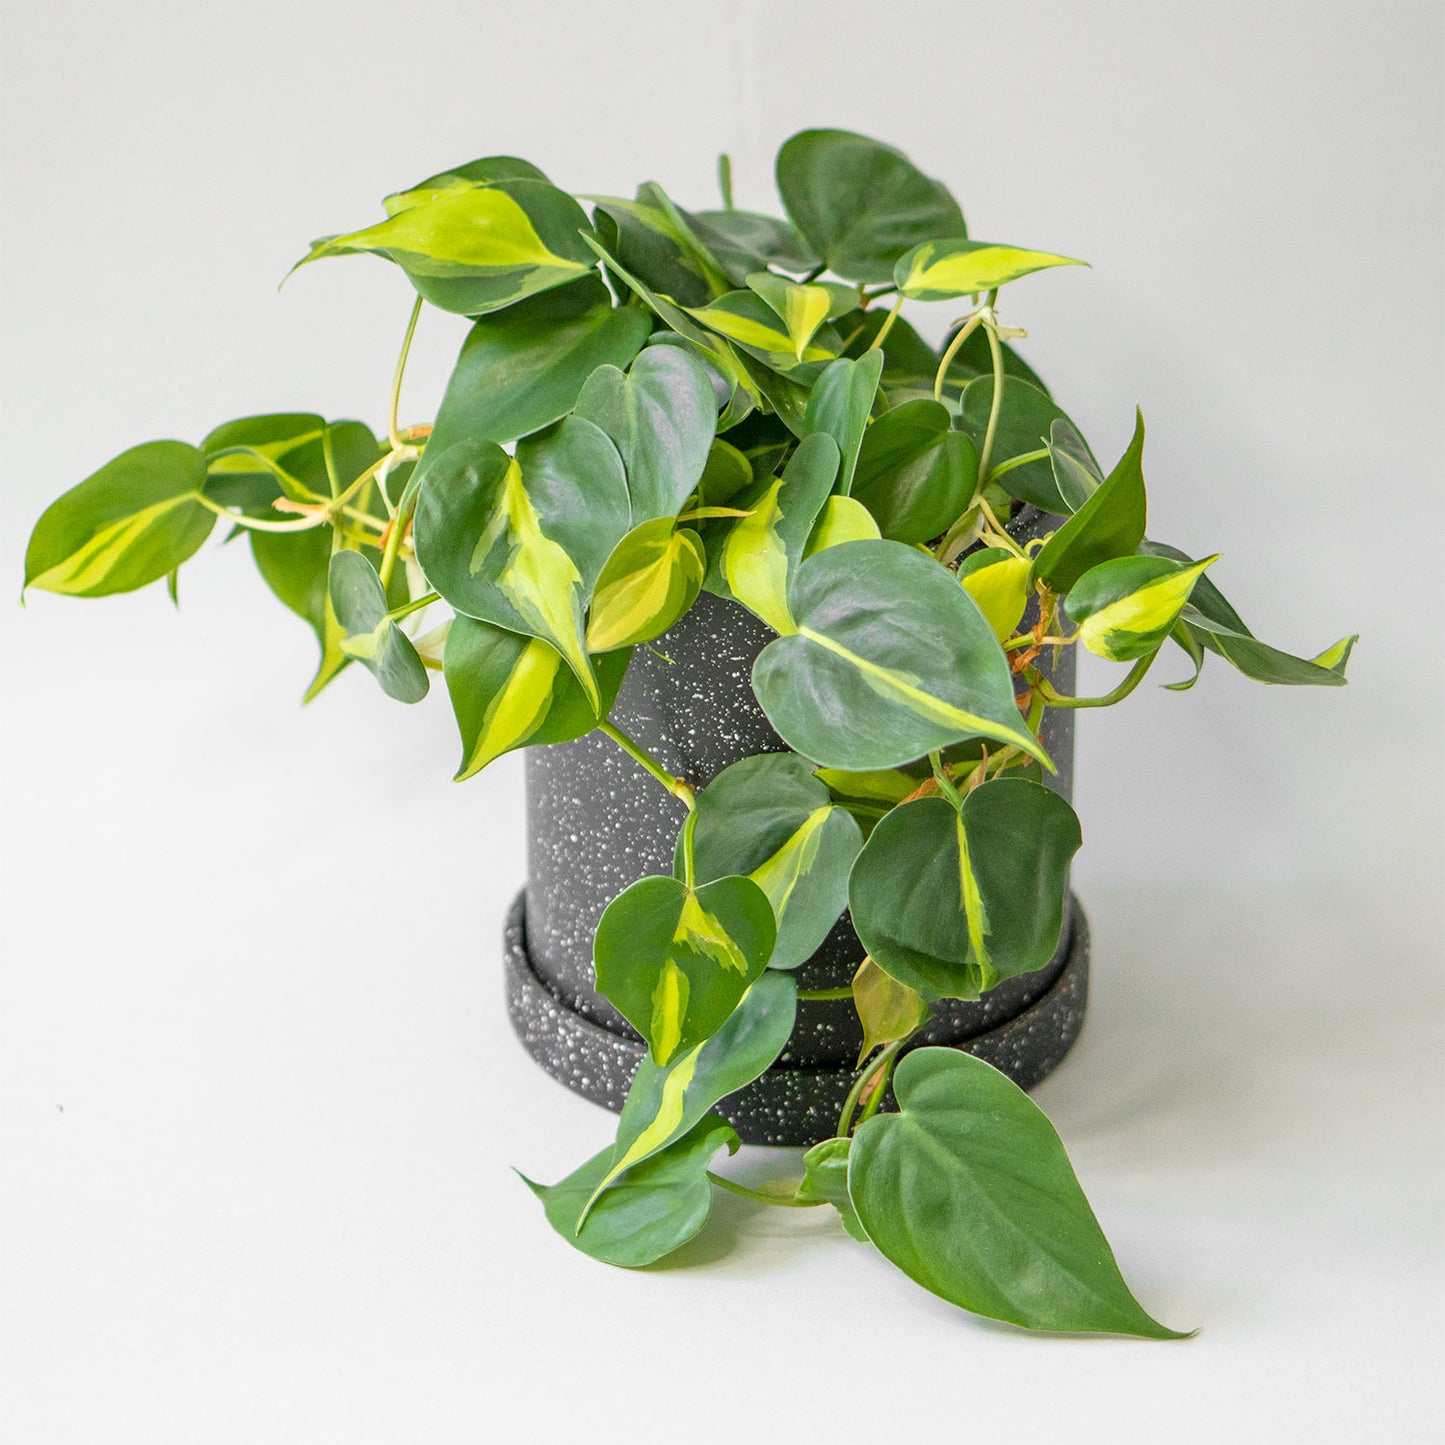 Potted Easy-Care Houseplant Phillodendron Scandens Brasil 6” - Buy repotted easy-care indoor plant Philodendron Scandens Brasil for delivery at Planteia